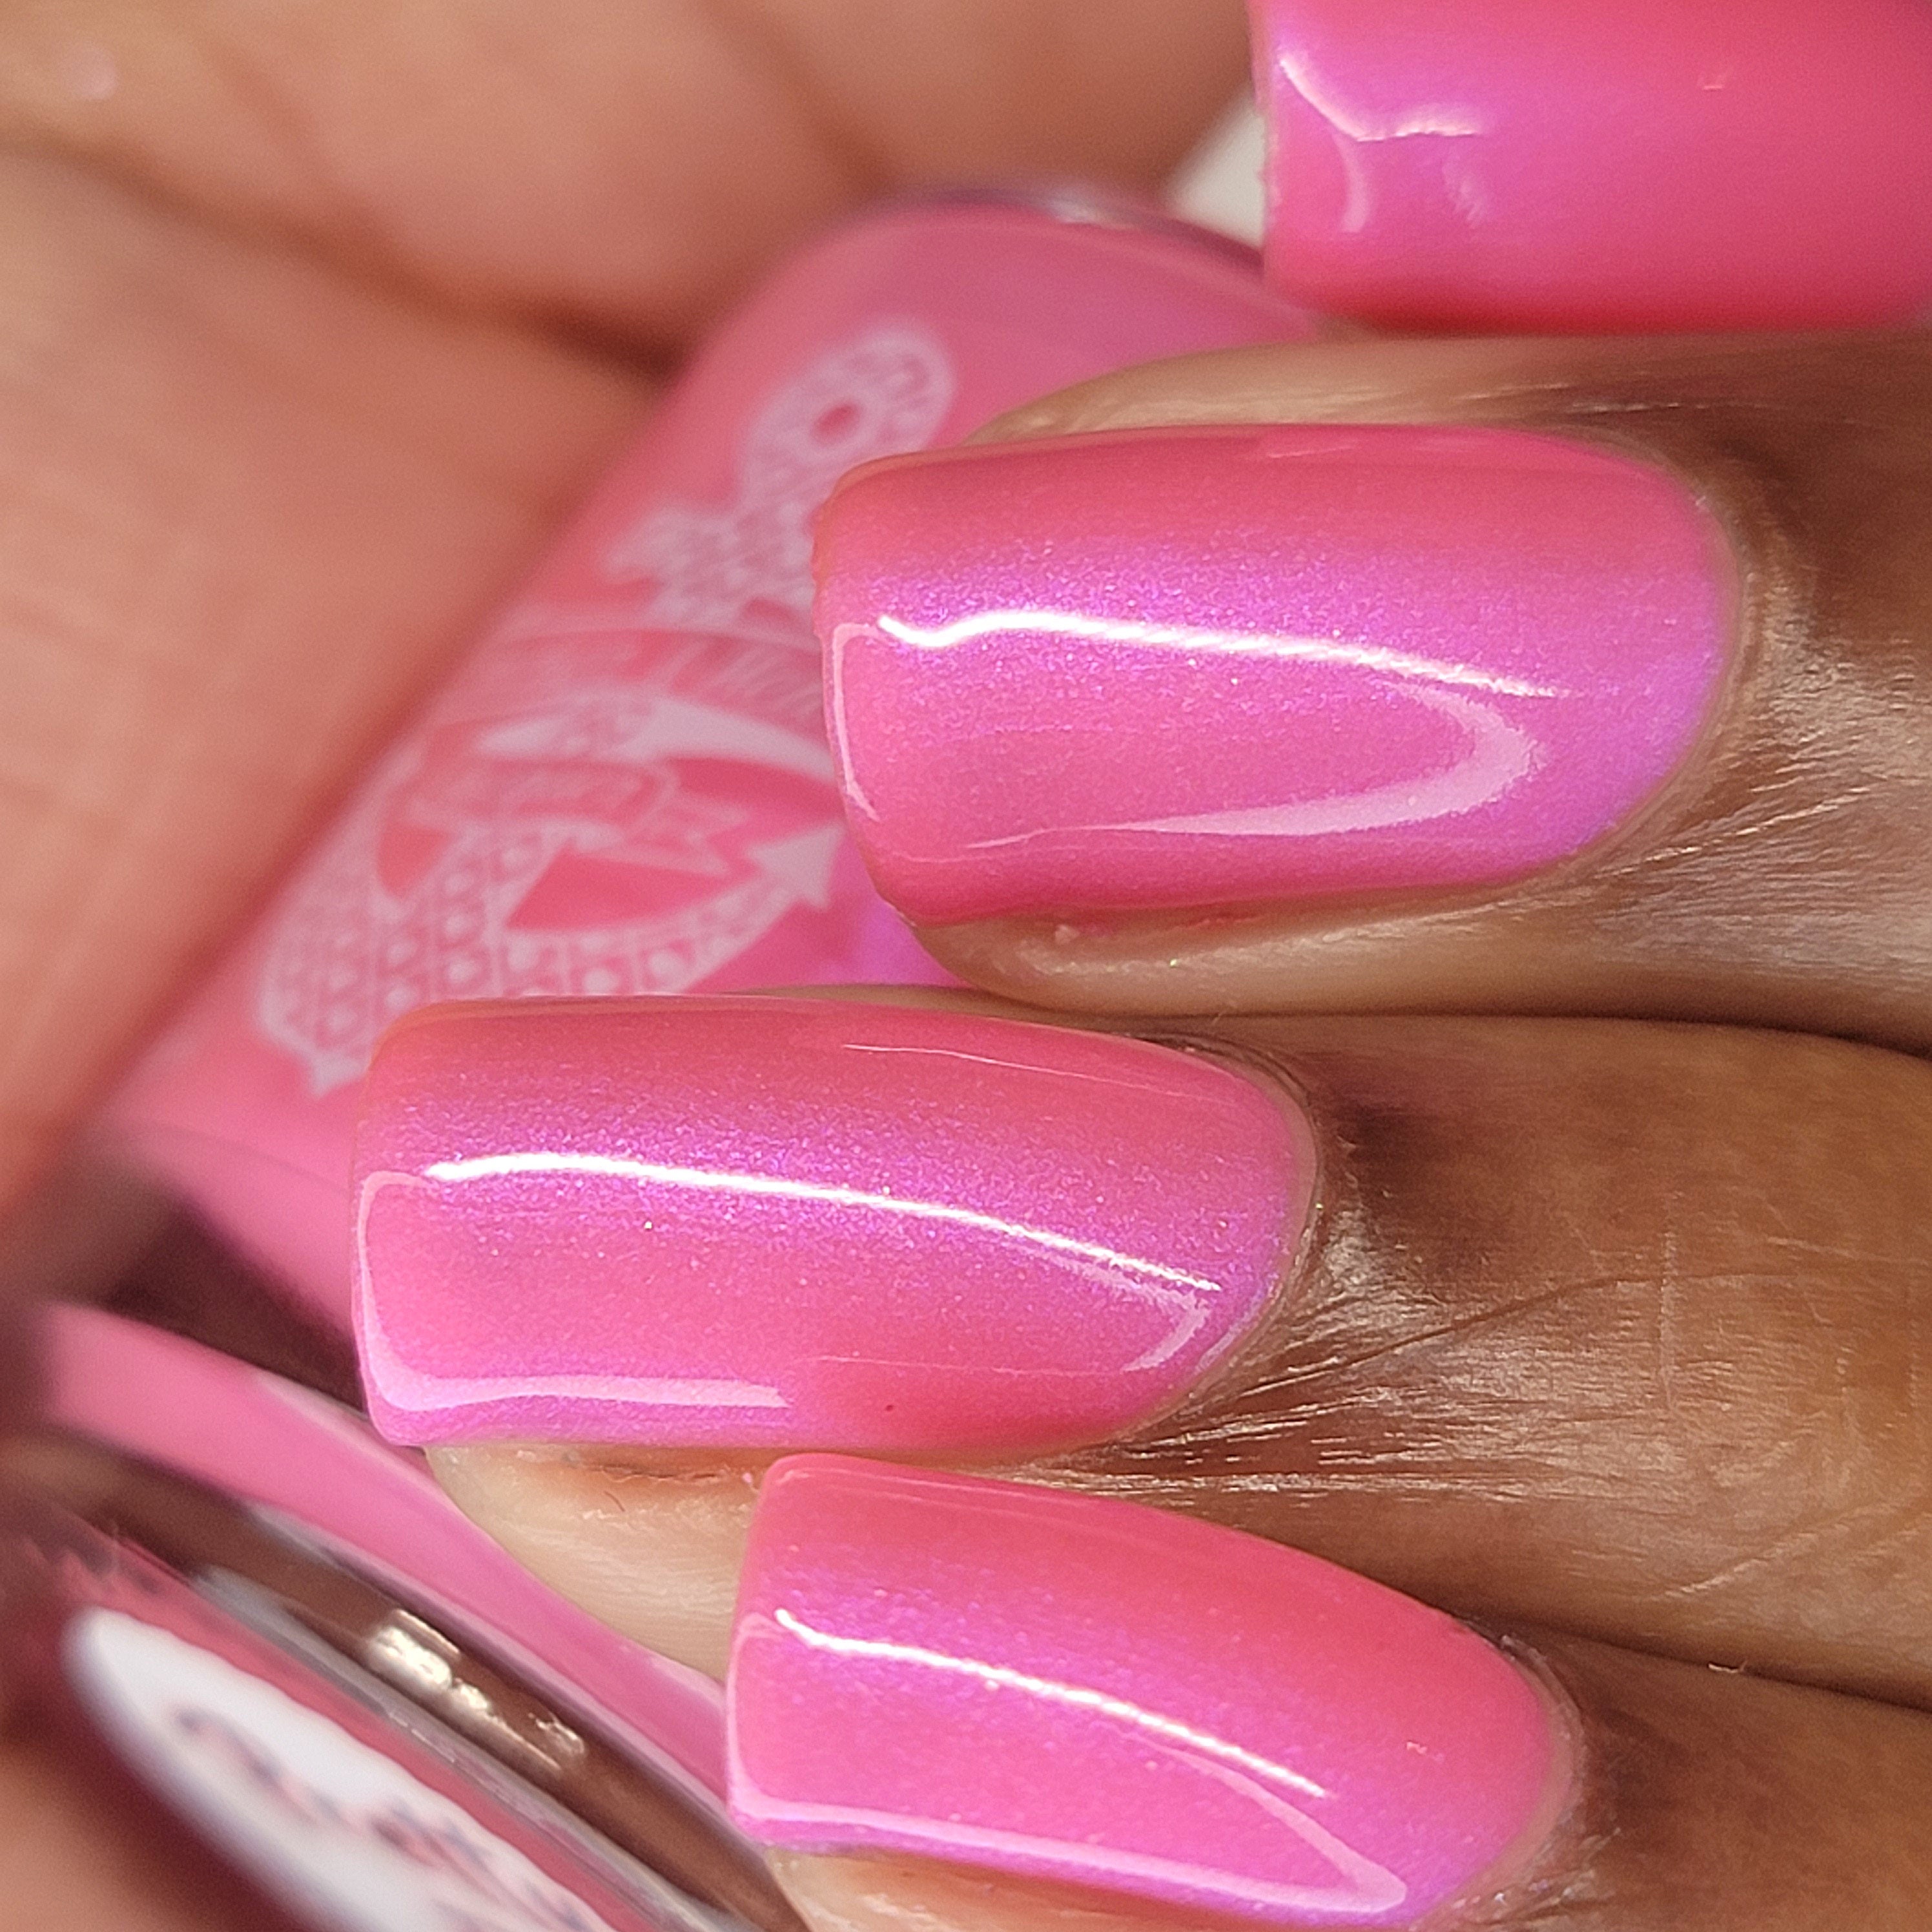 15 Trendy Hot Pink Nails With Glitter Designs You'll Adore - ZaiuBee